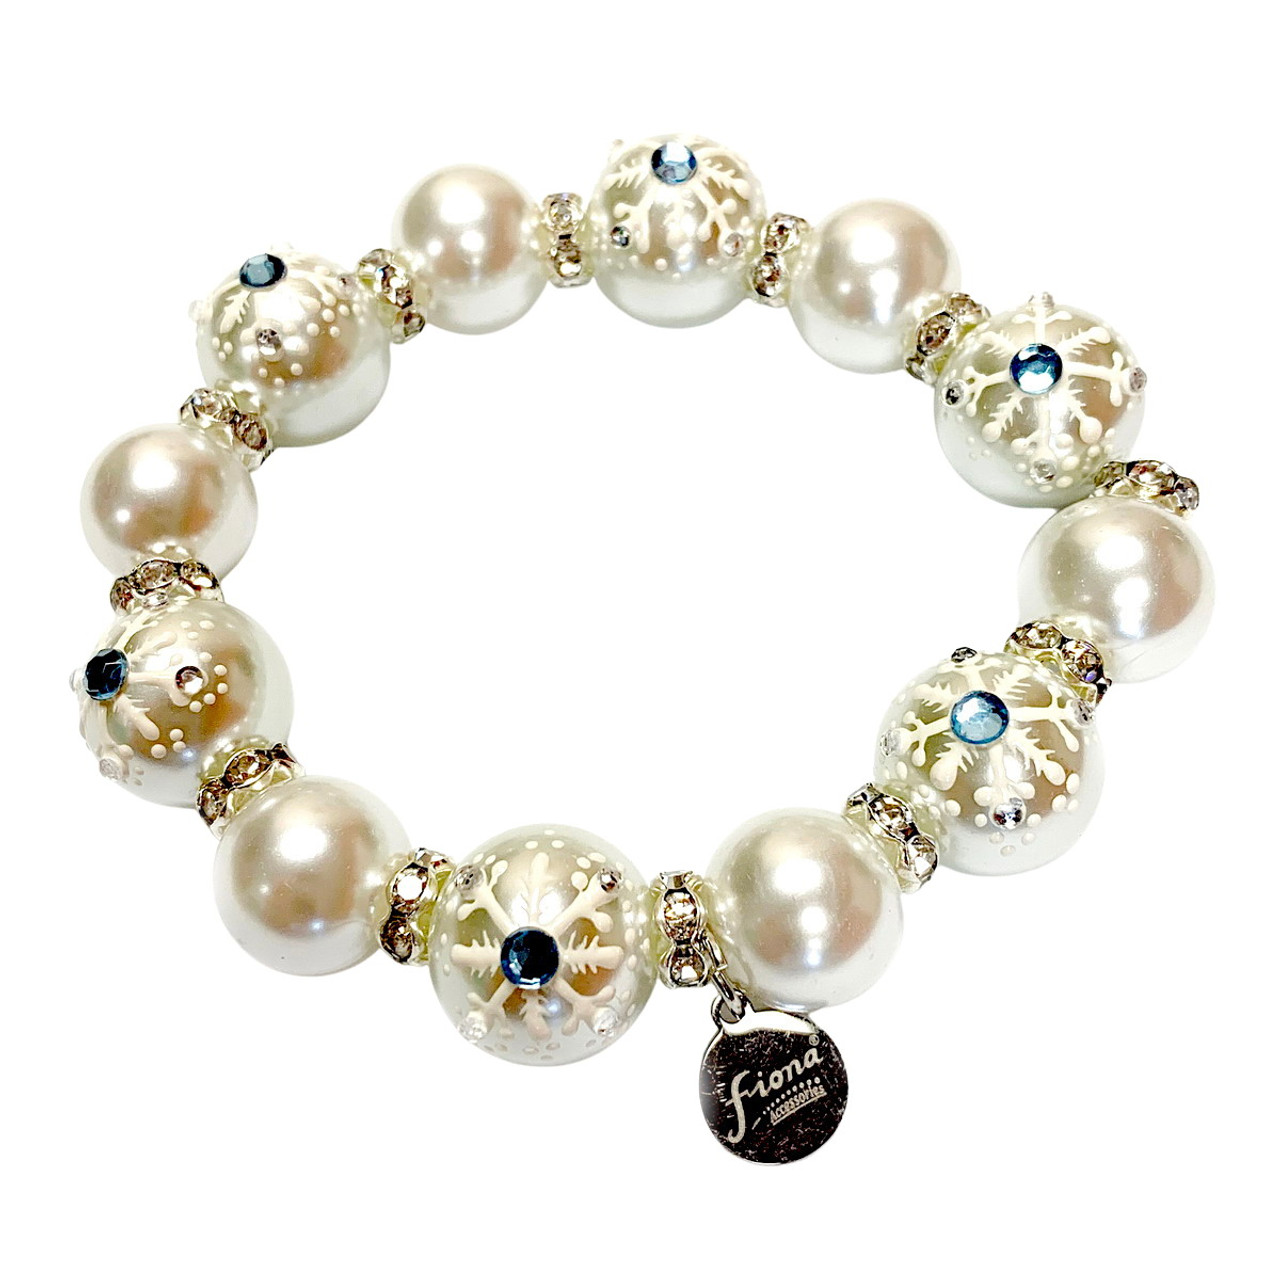 Advanced Beaded Glass Shell Synthetic Pearl Bracelets For Women White Round  Strand In 4 14mm Sizes With Elastic Hand Jewelry Making Design From  Melvinate, $7.43